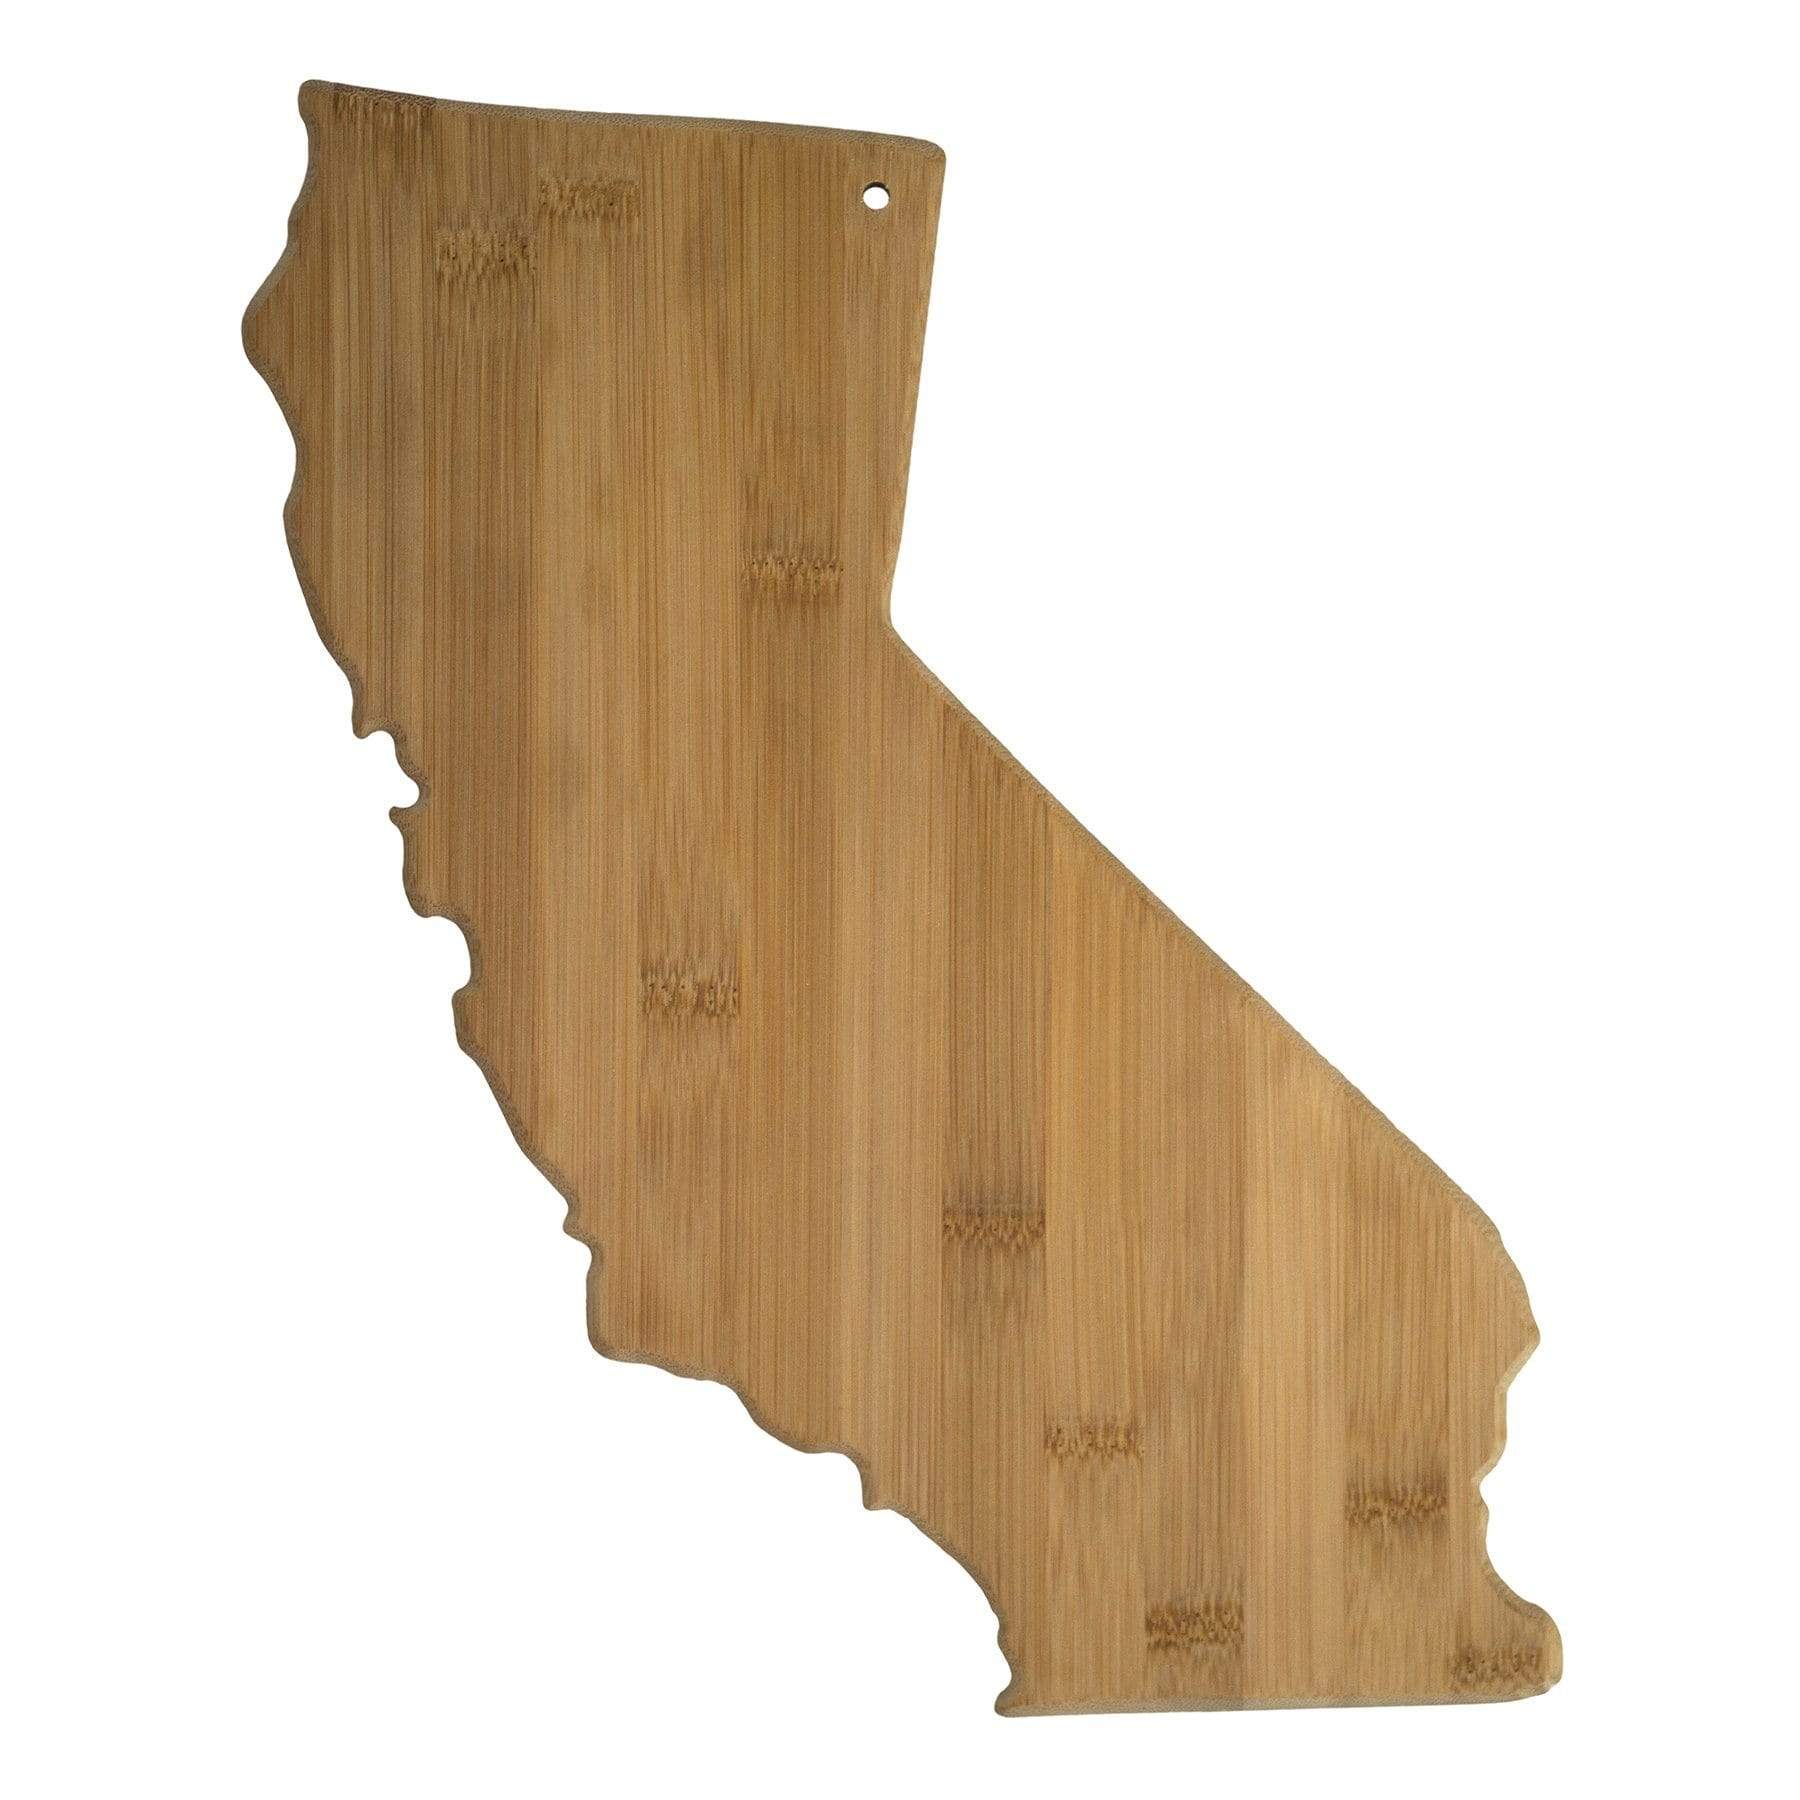 Totally Bamboo California State Shaped Bamboo Serving and Cutting Board